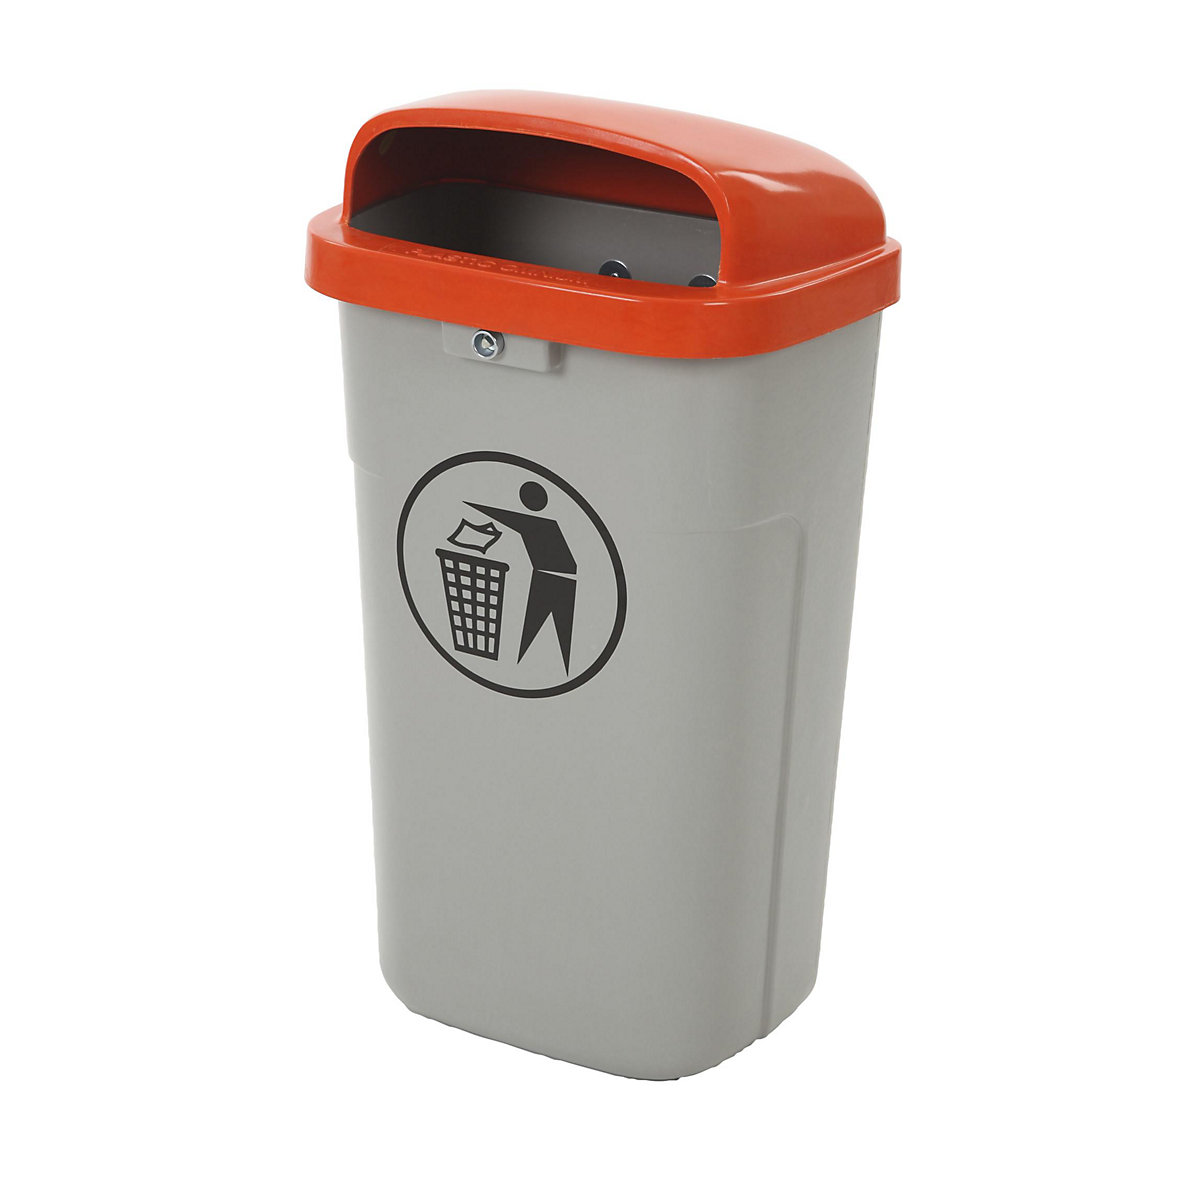 Outdoor waste collector, fireproof